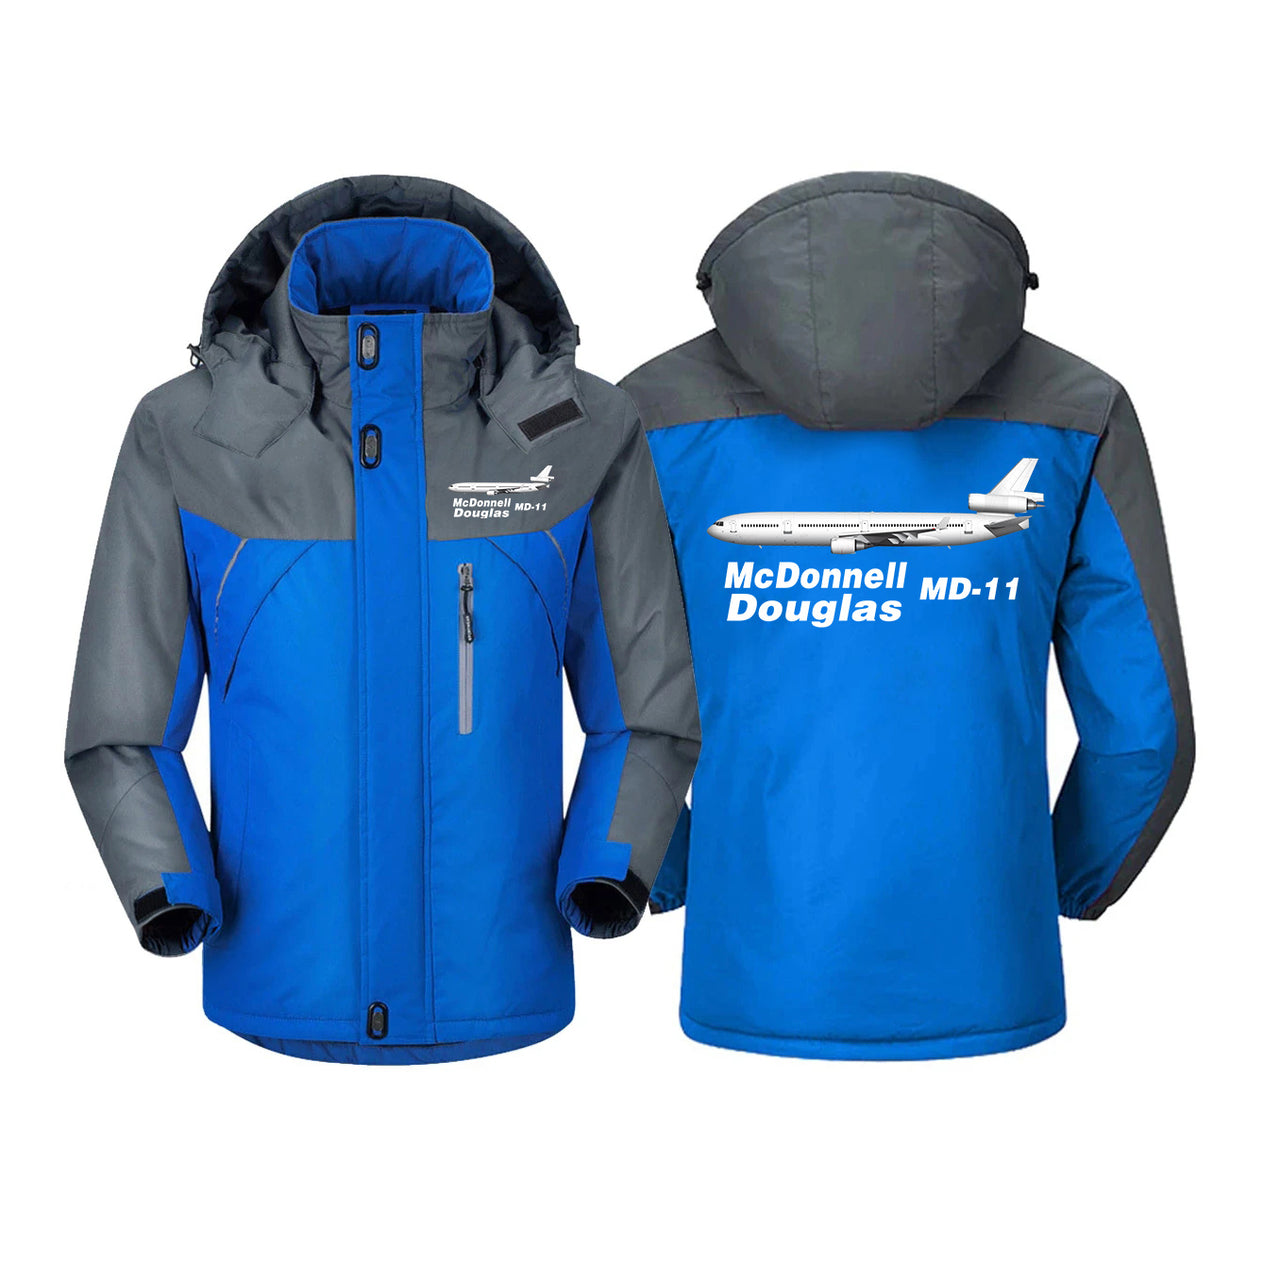 The McDonnell Douglas MD-11 Designed Thick Winter Jackets